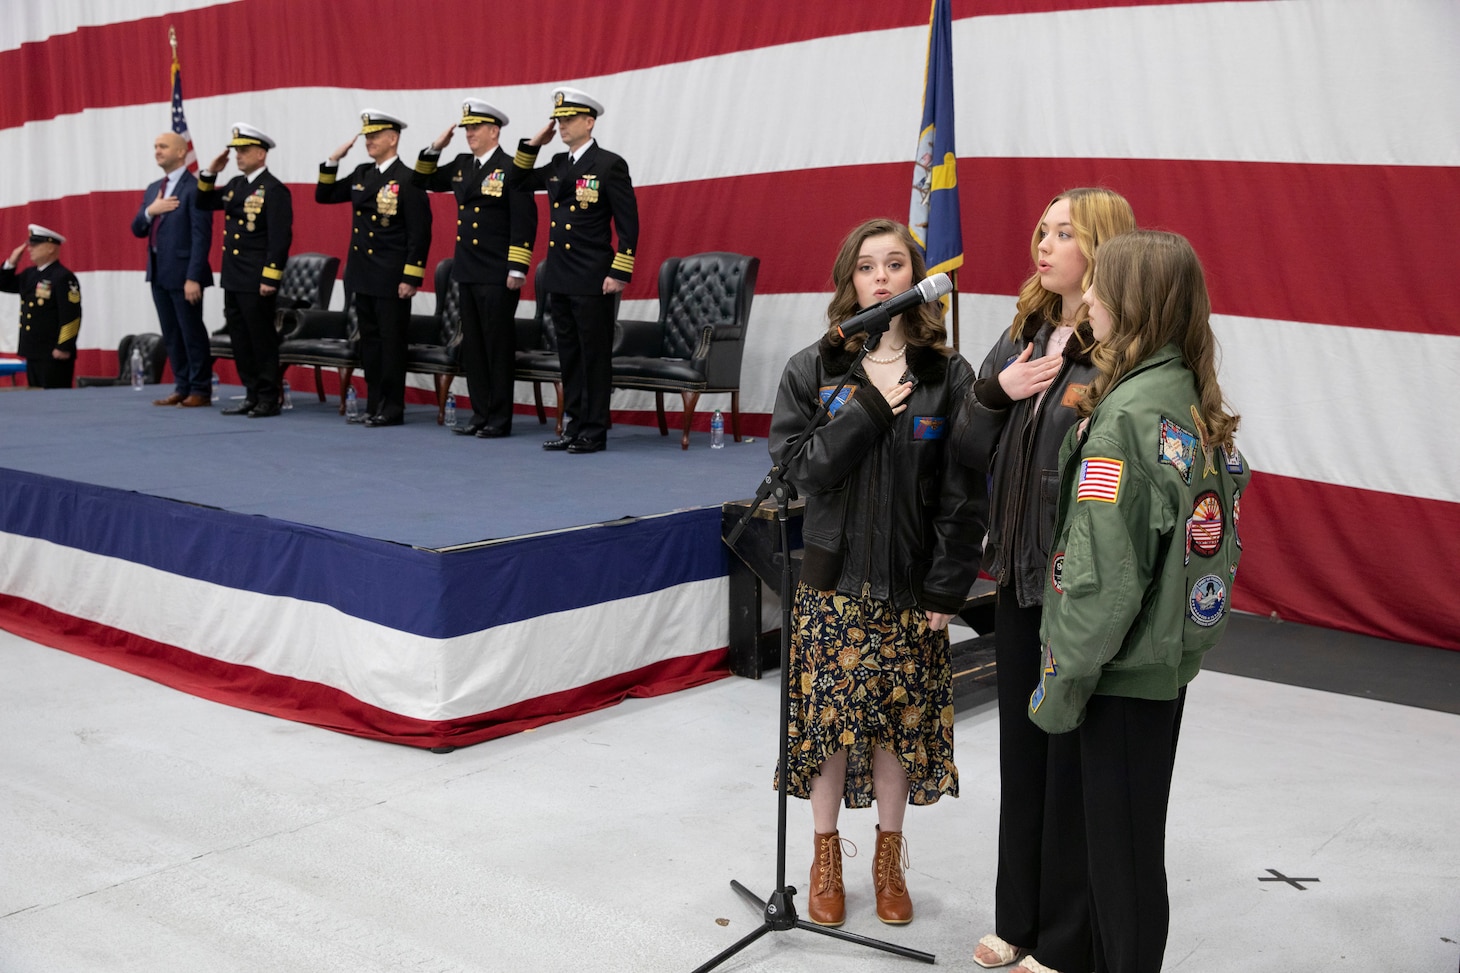 May, Emily and Molly Fraser, daughters of Capt. William Fraser, outgoing Commander, Tactical Support Wing (CTSW), sing the national anthem during the CTSW change of command ceremony in the Fleet Logistics Support Wing (VR) 59 hangar at Naval Air Station Joint Reserve Base Fort Worth, Texas.